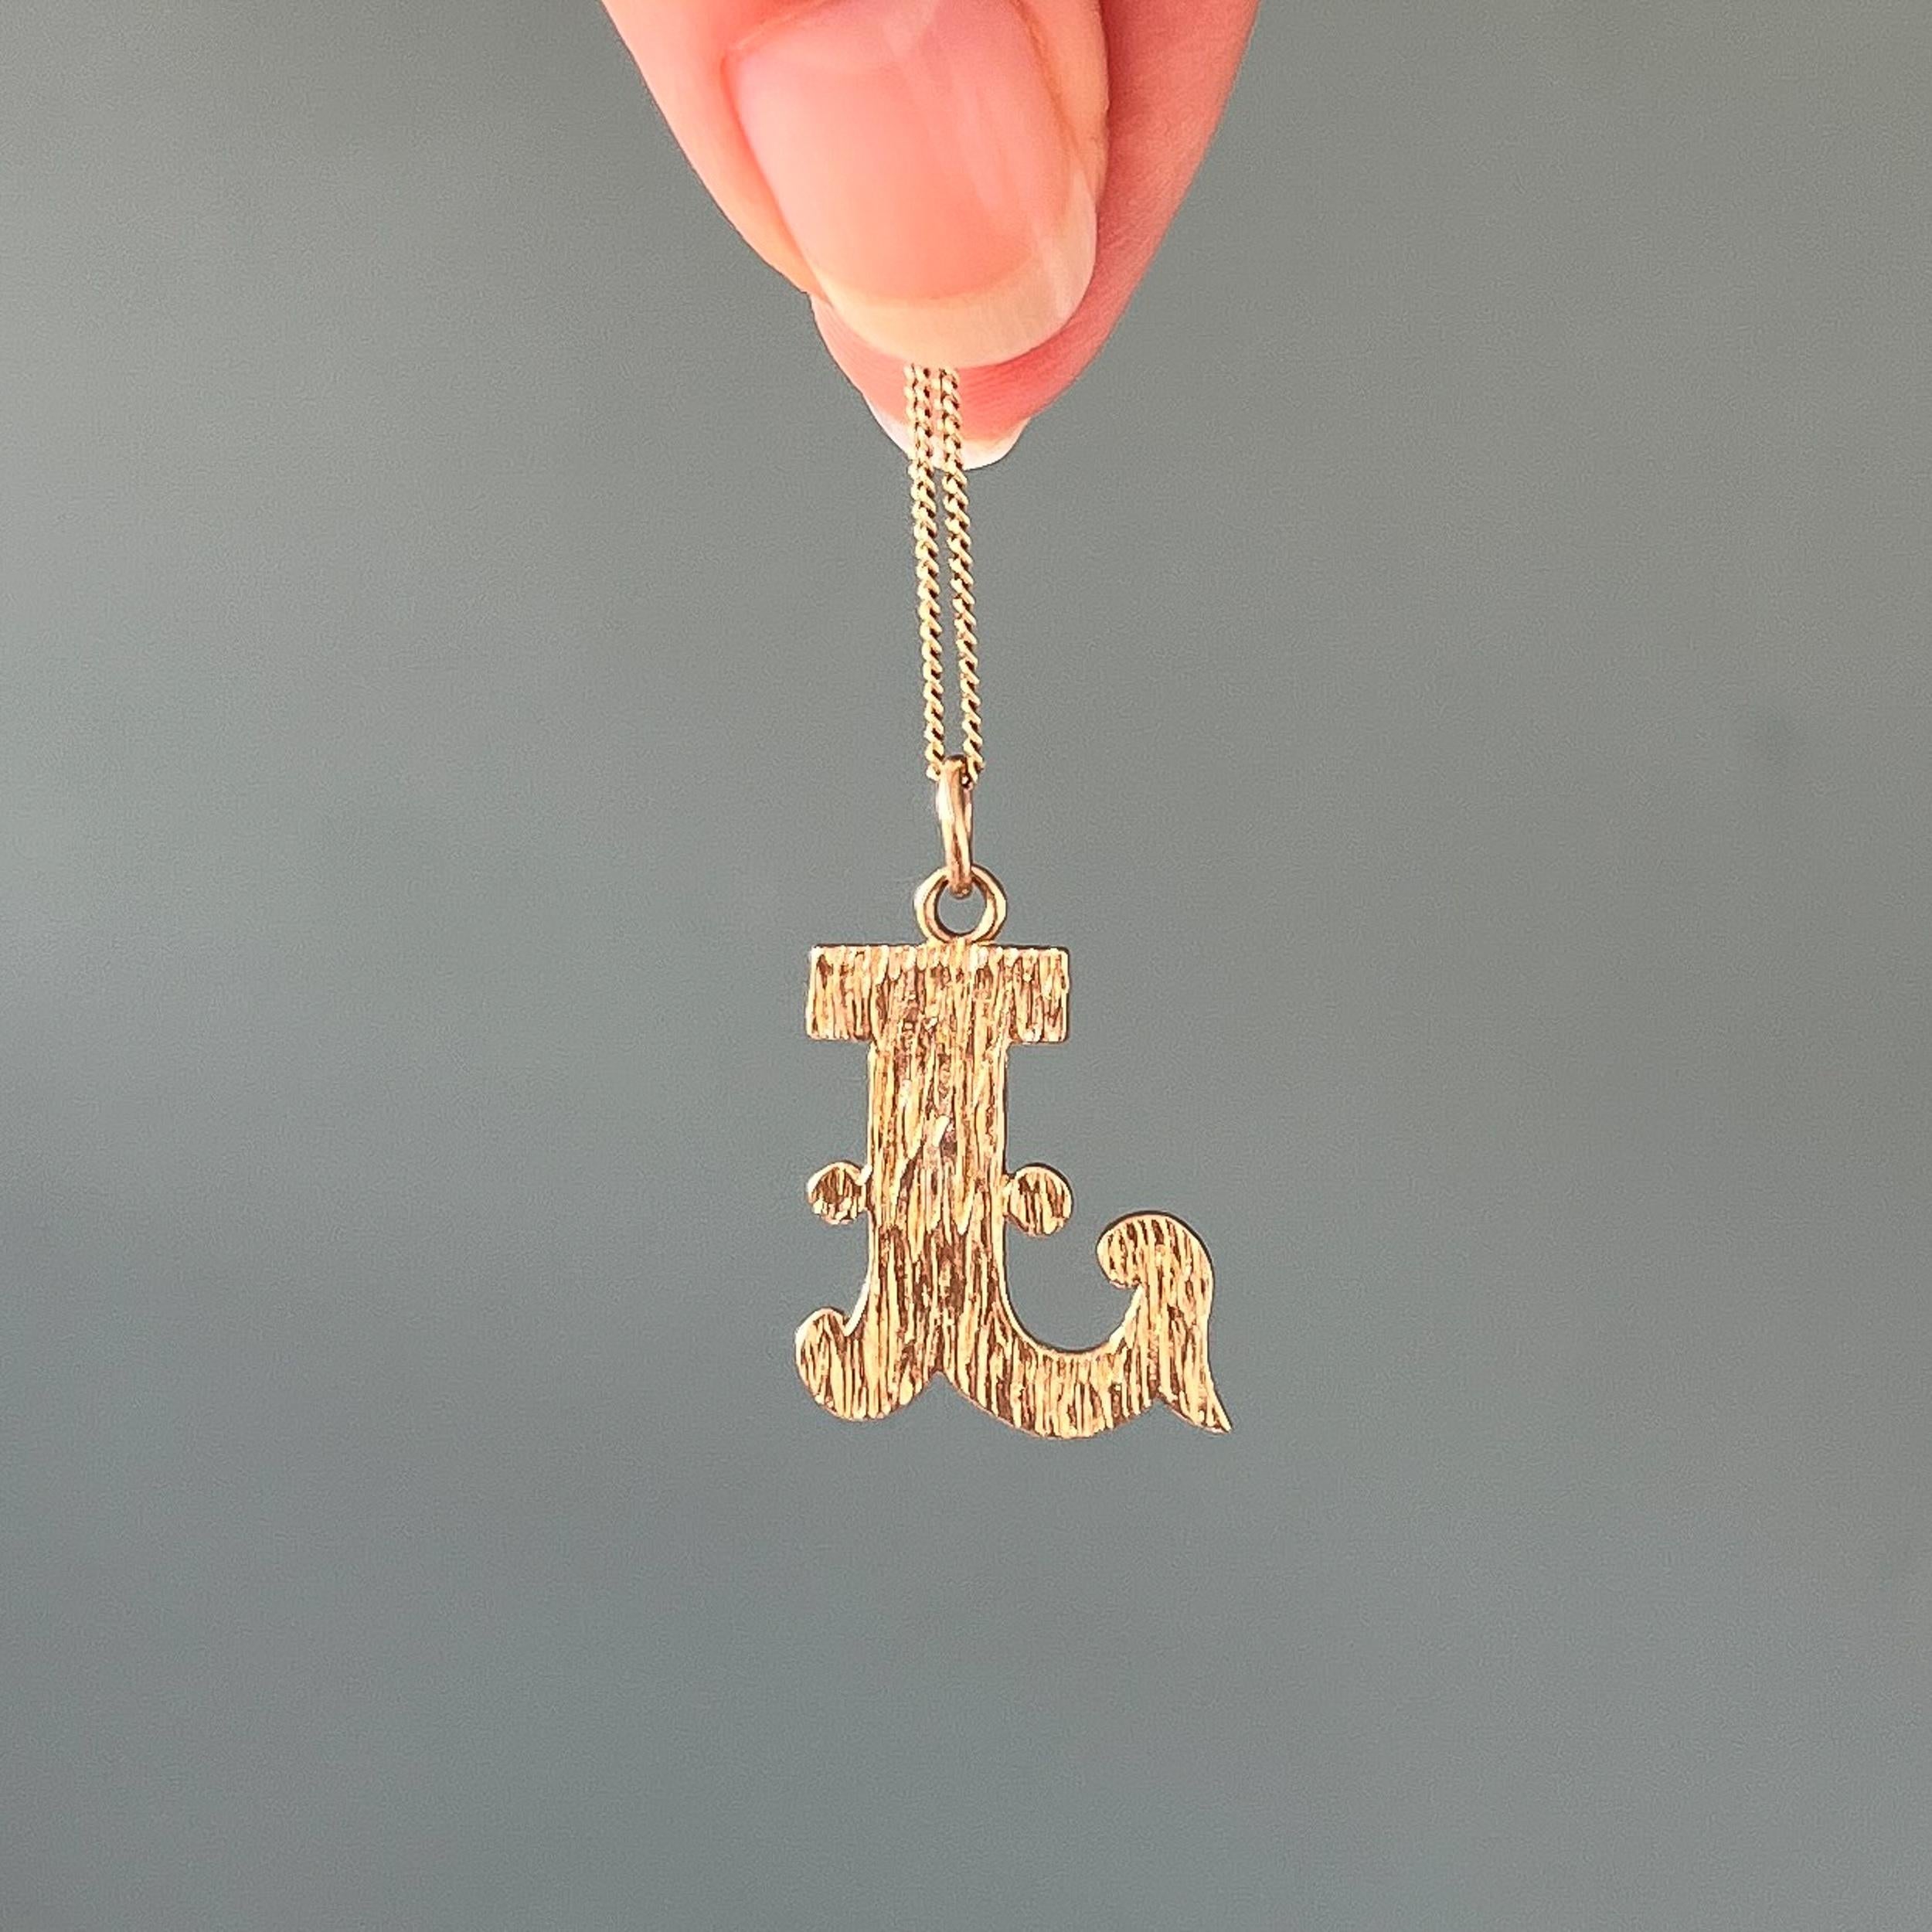 A vintage 9 karat yellow gold L initial letter charm pendant. This charm is nicely detailed and beautifully made with gold and etched structure design. The font reminds me of the old western cowboy style - its towns and saloons. This charm is